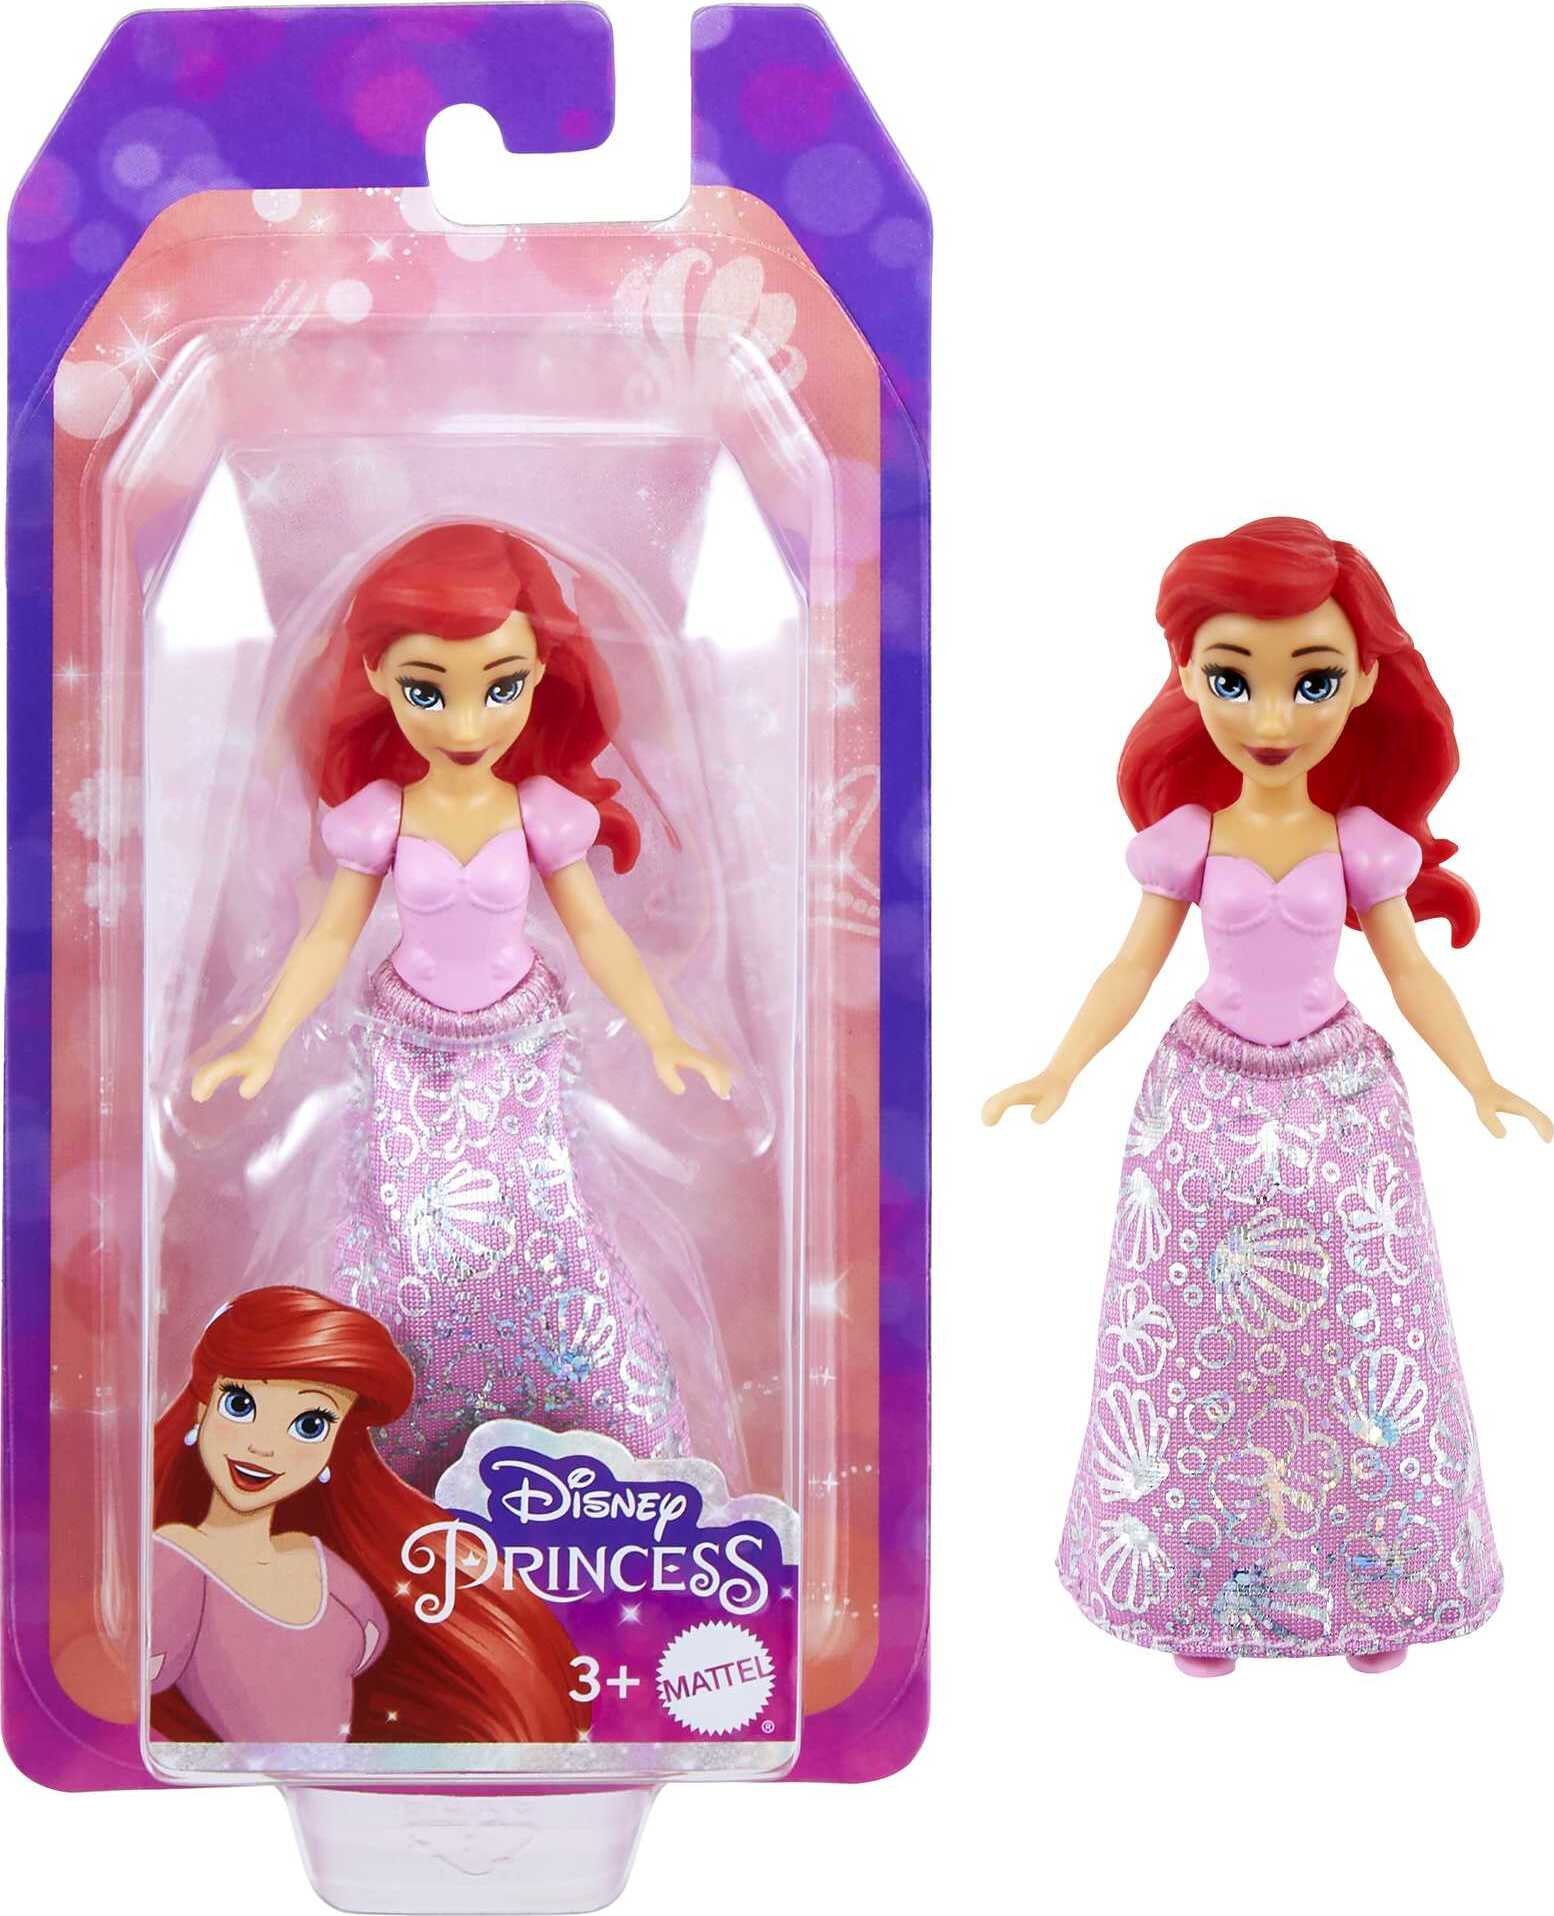 Disney Princess Ariel Small Doll, Red Hair & Blue Eyes, Signature Look with Pink Gown - image 1 of 6